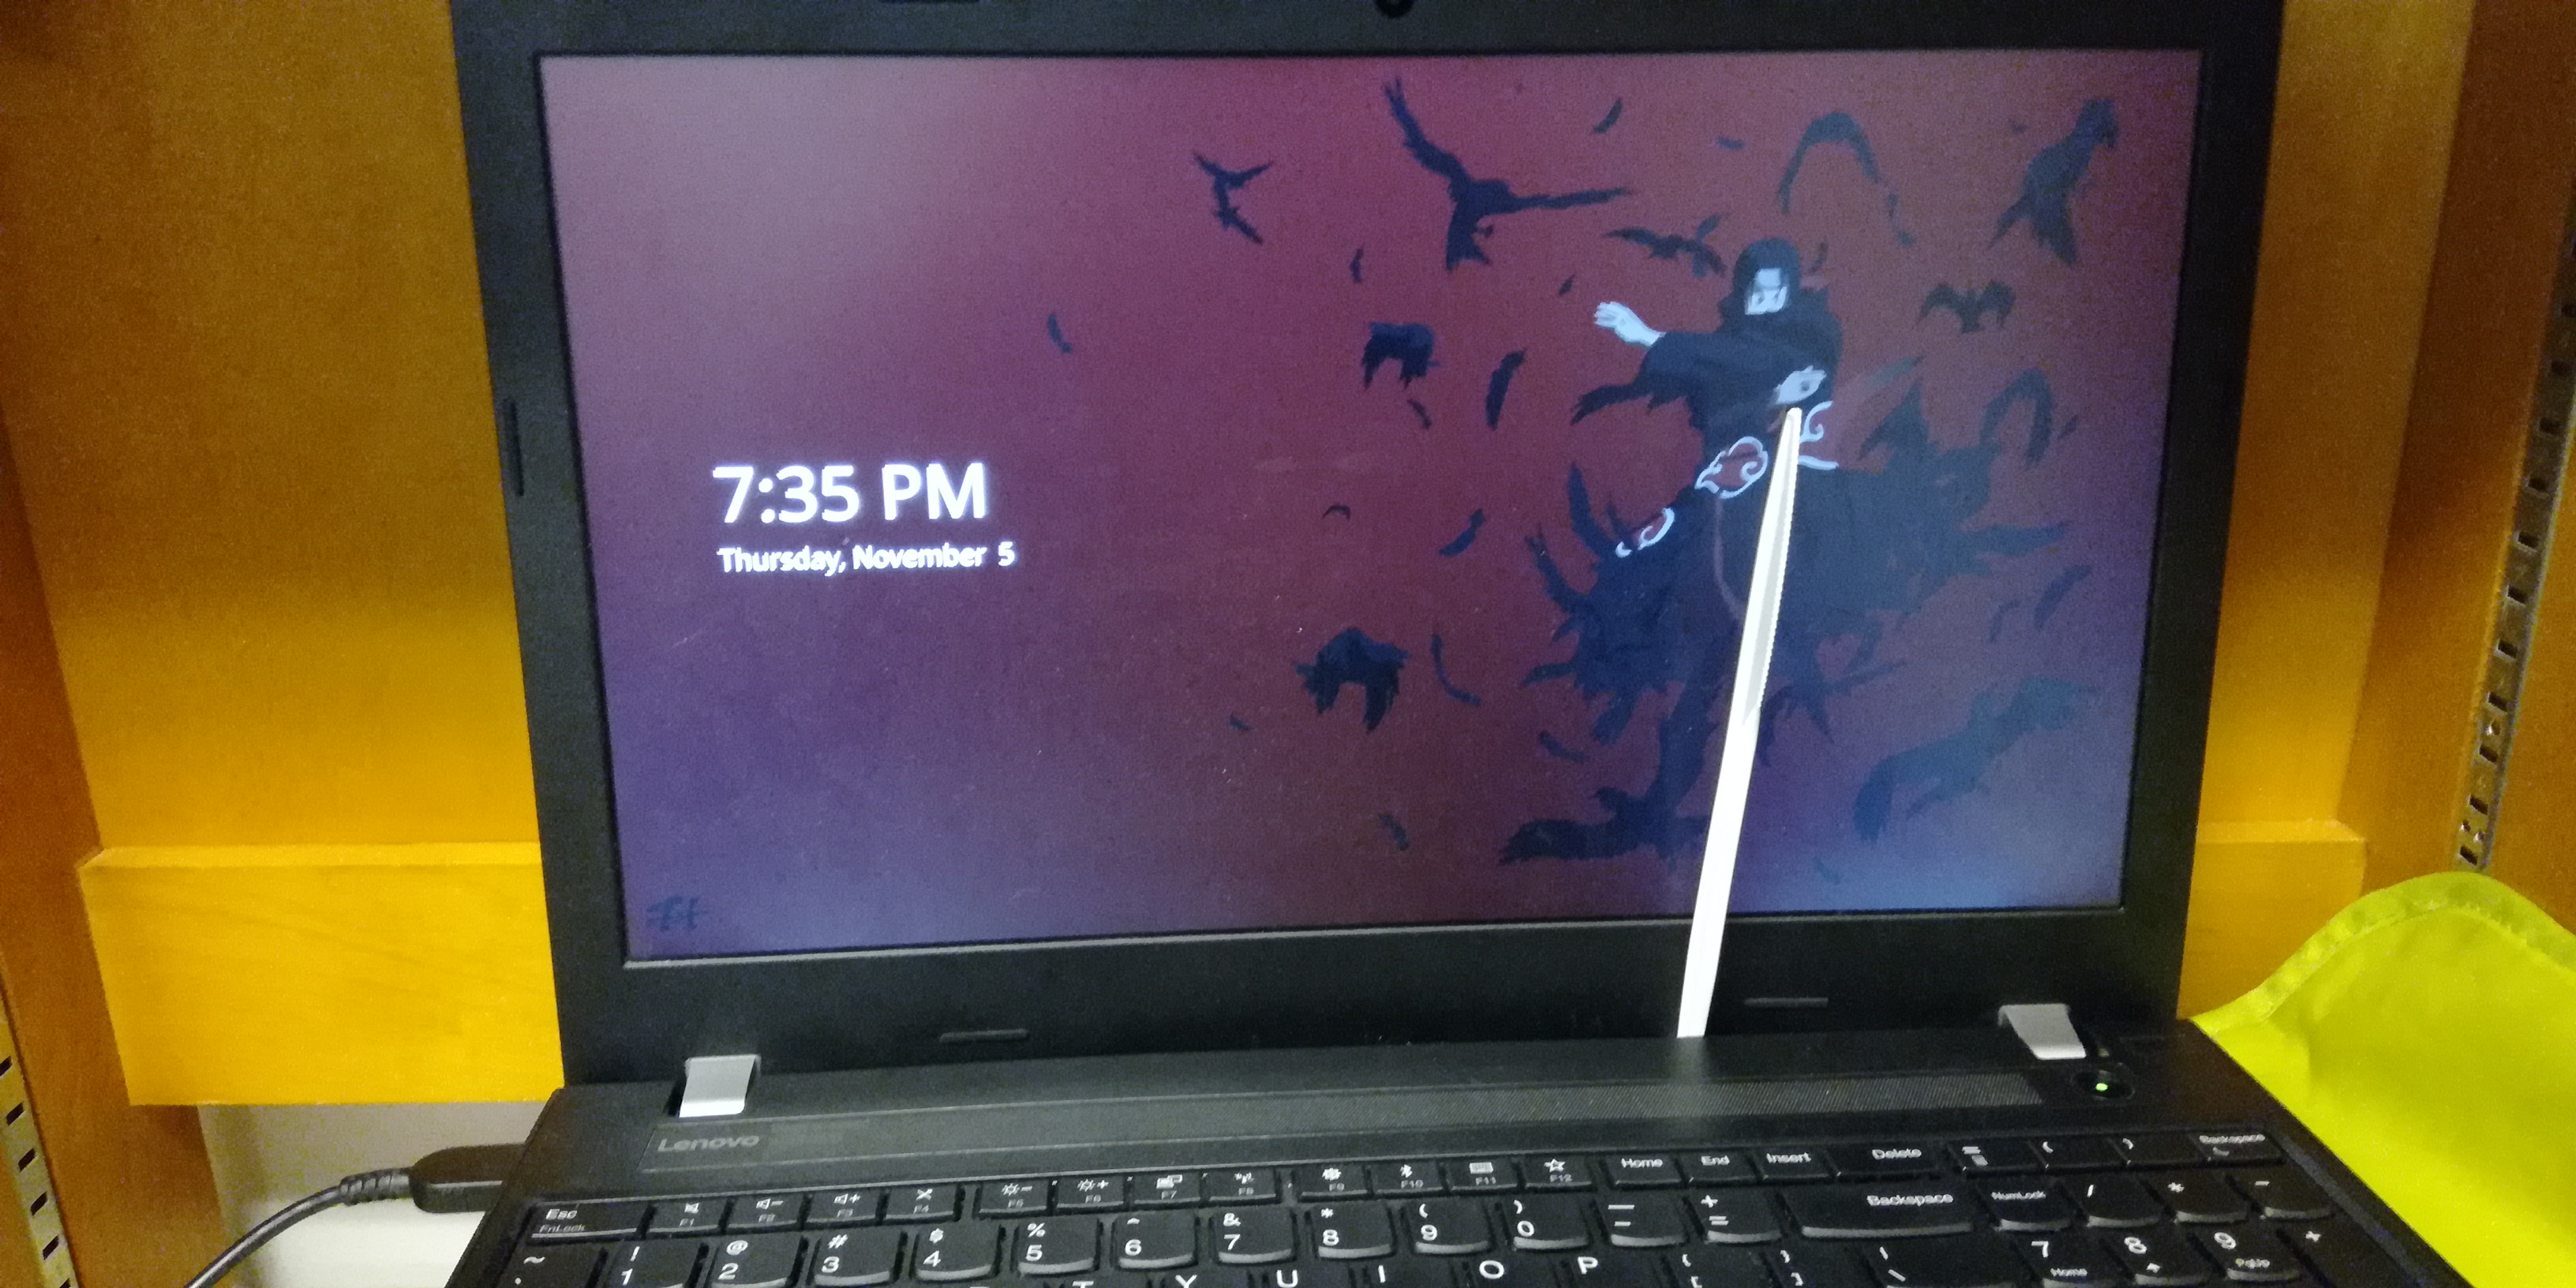 Lenovo Thinkpad E570 display flickering issues - Other Hardware -  Level1Techs Forums